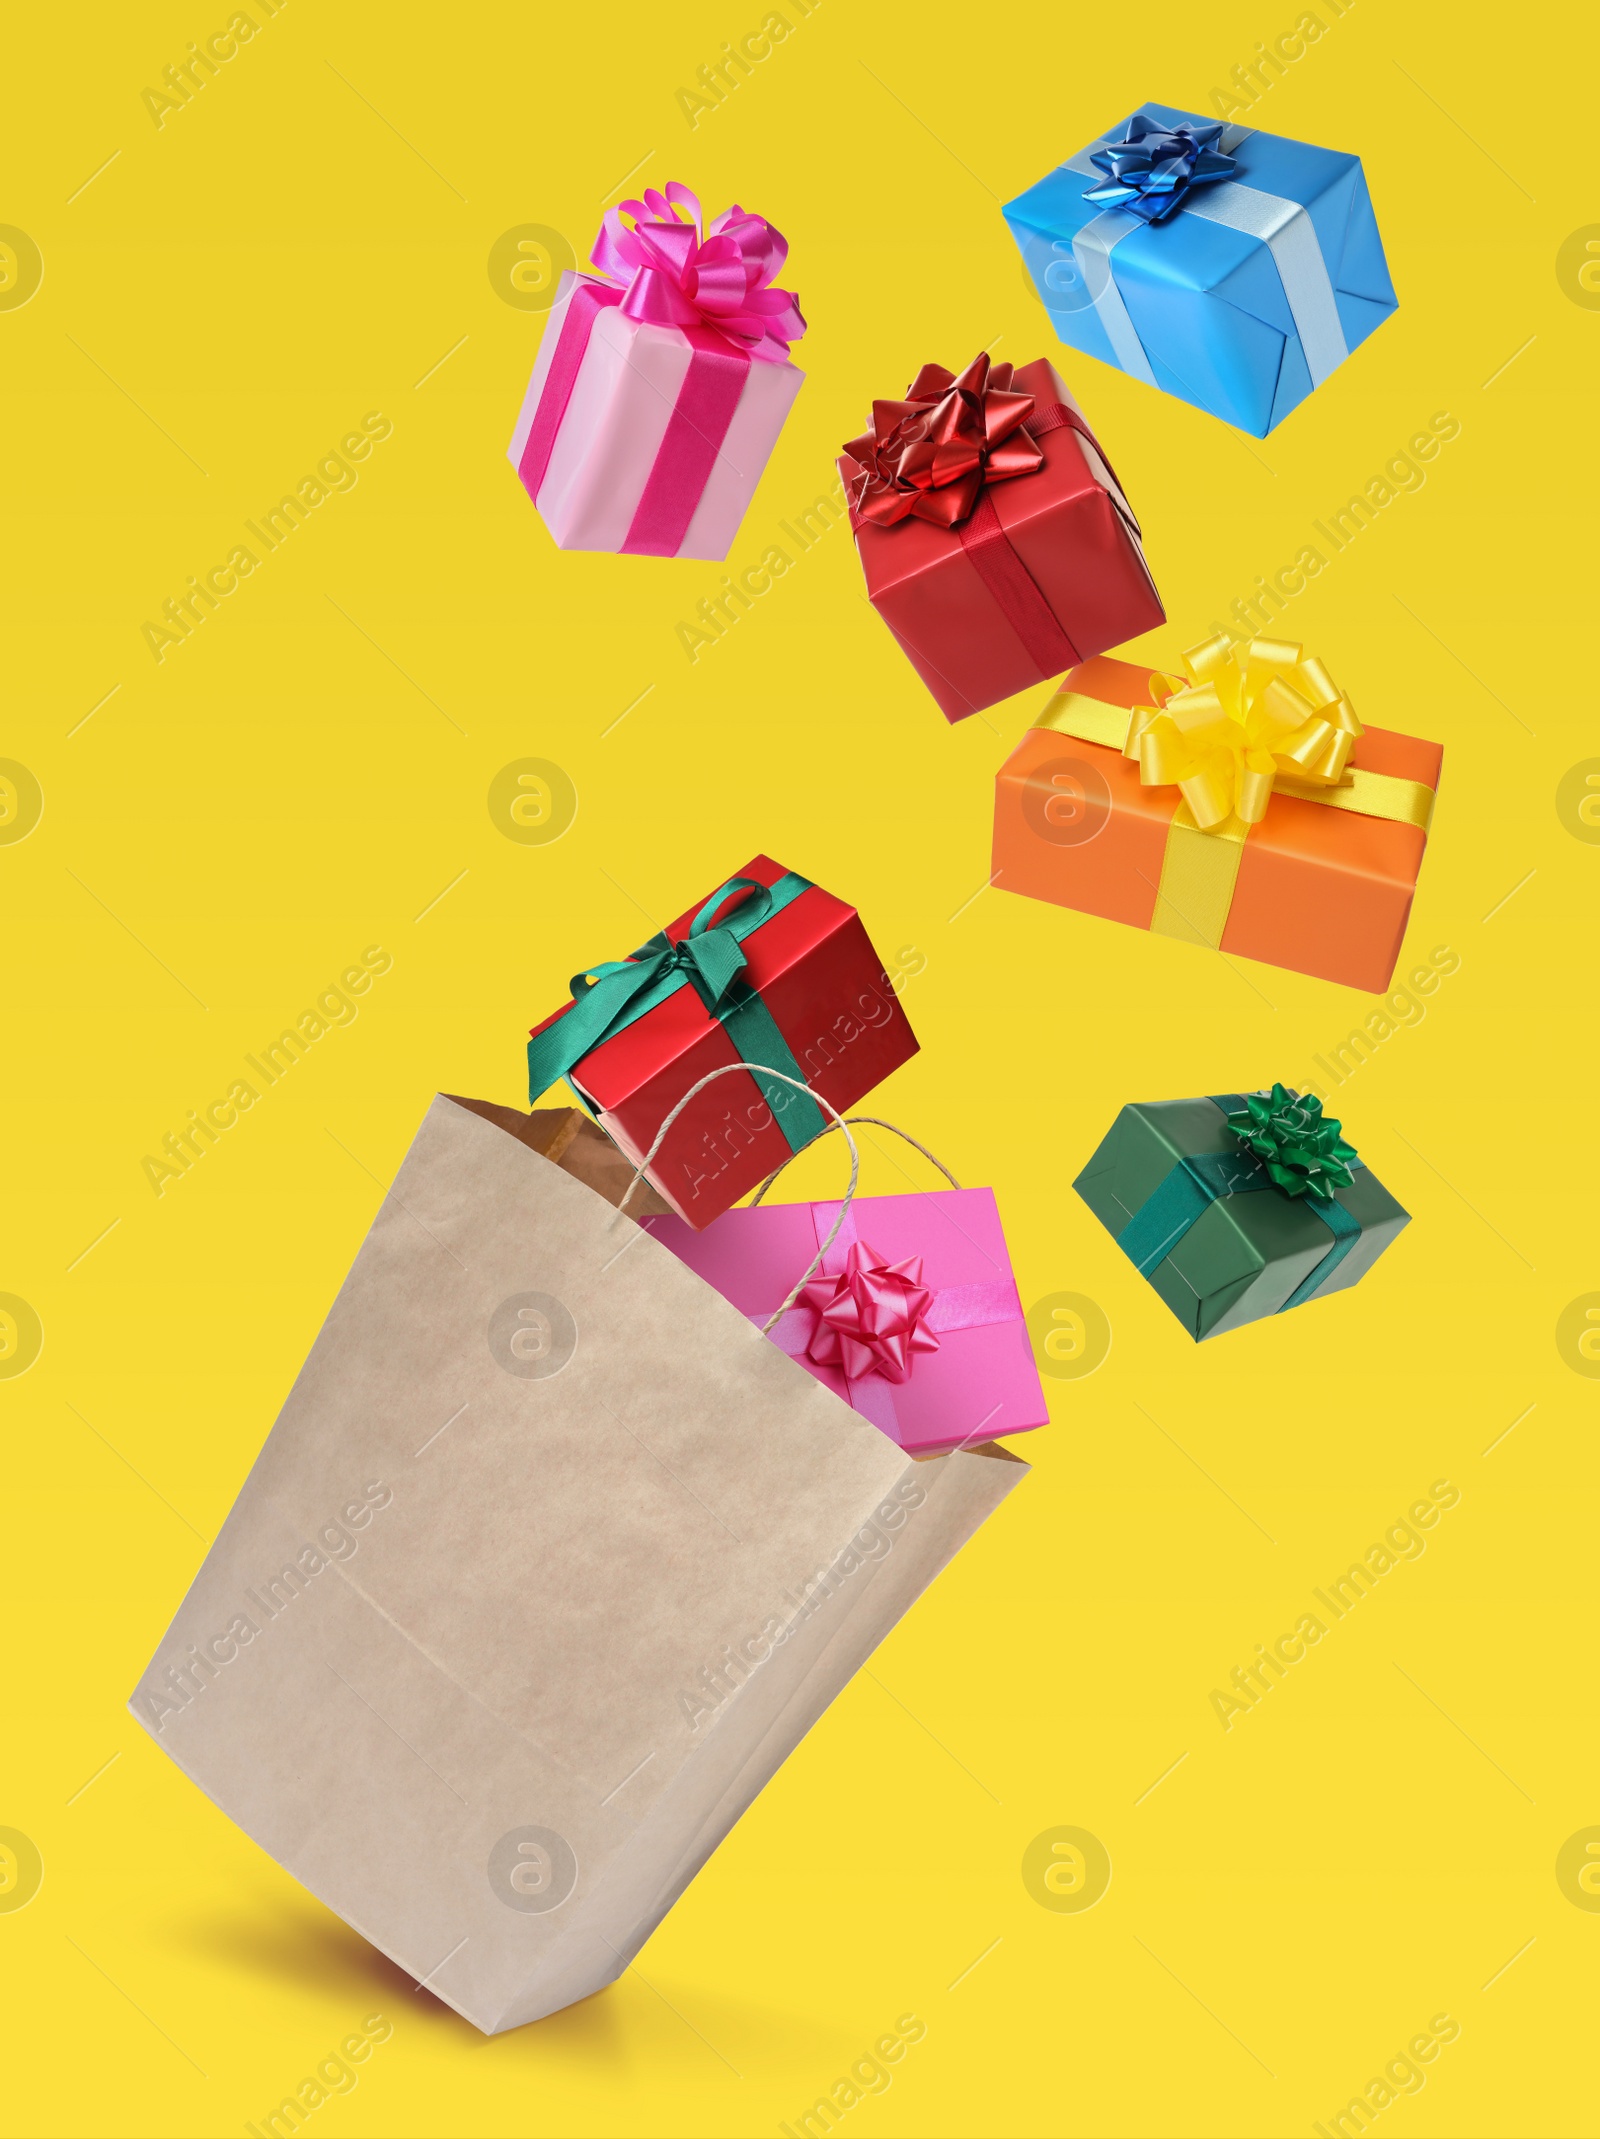 Image of Many different gift boxes falling into paper shopping bag on yellow background